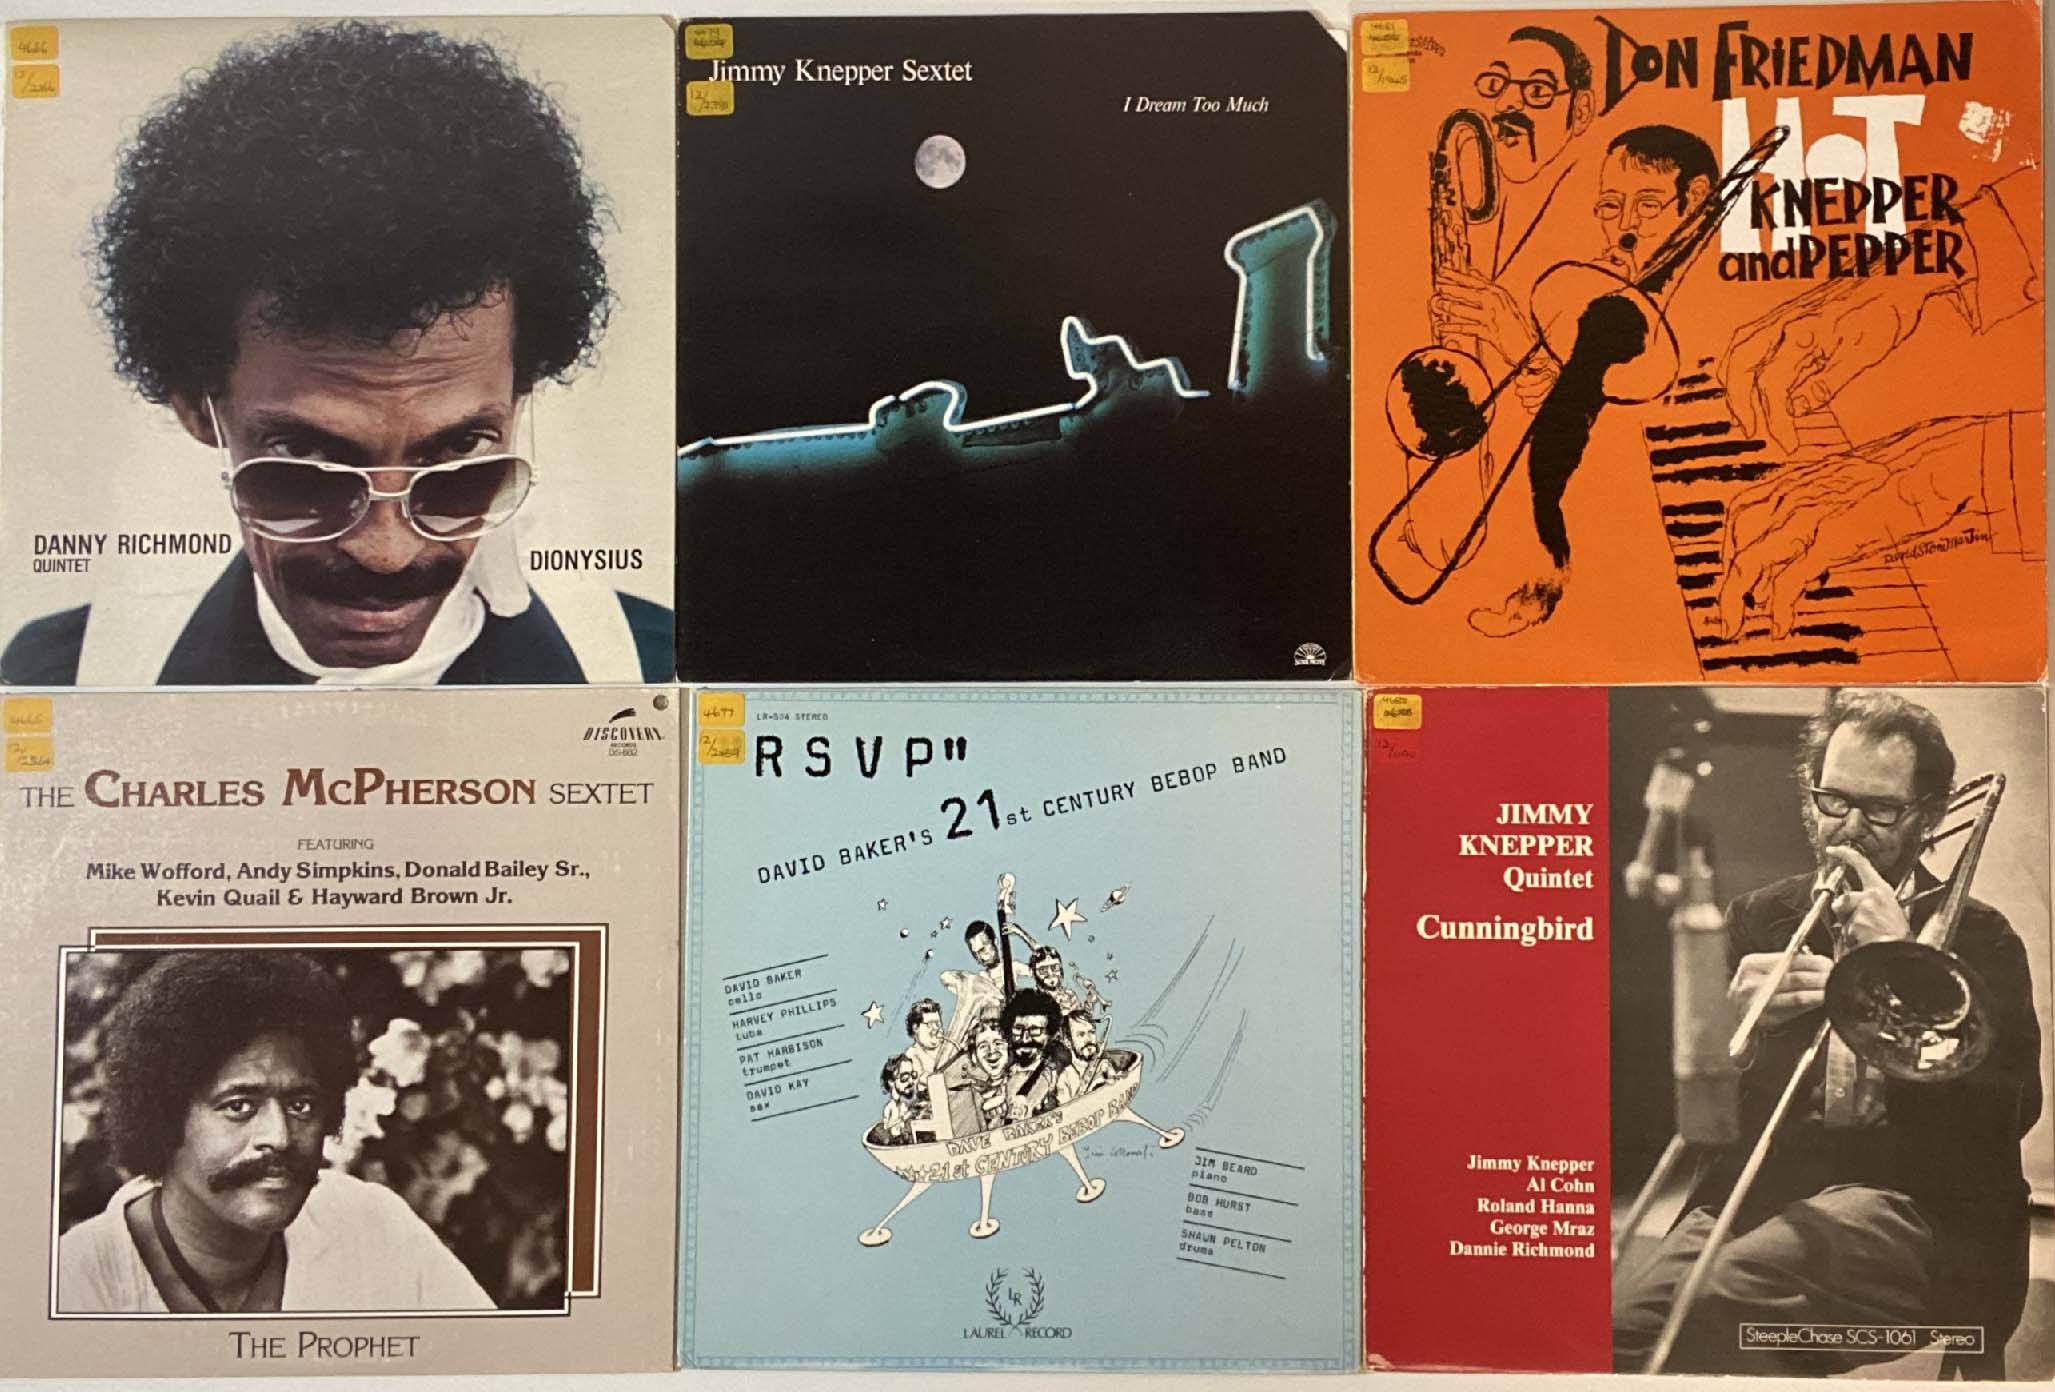 FREE/AVANT/IMPROVISATION JAZZ - LPs. More bill LPs with 28 included. - Image 4 of 5